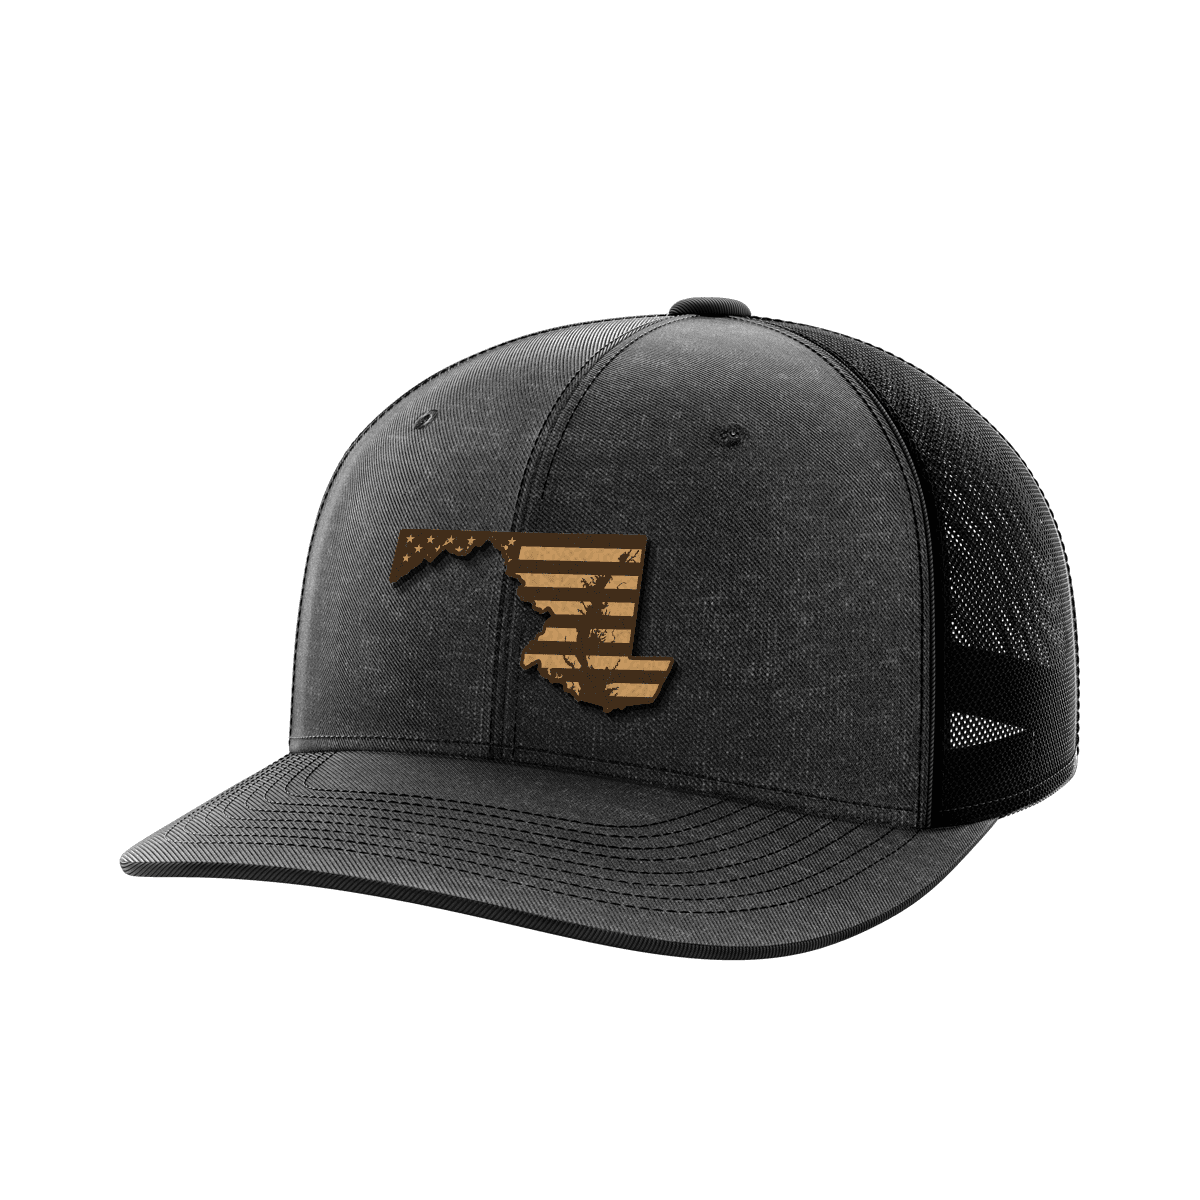 Maryland United Hats - Greater Half